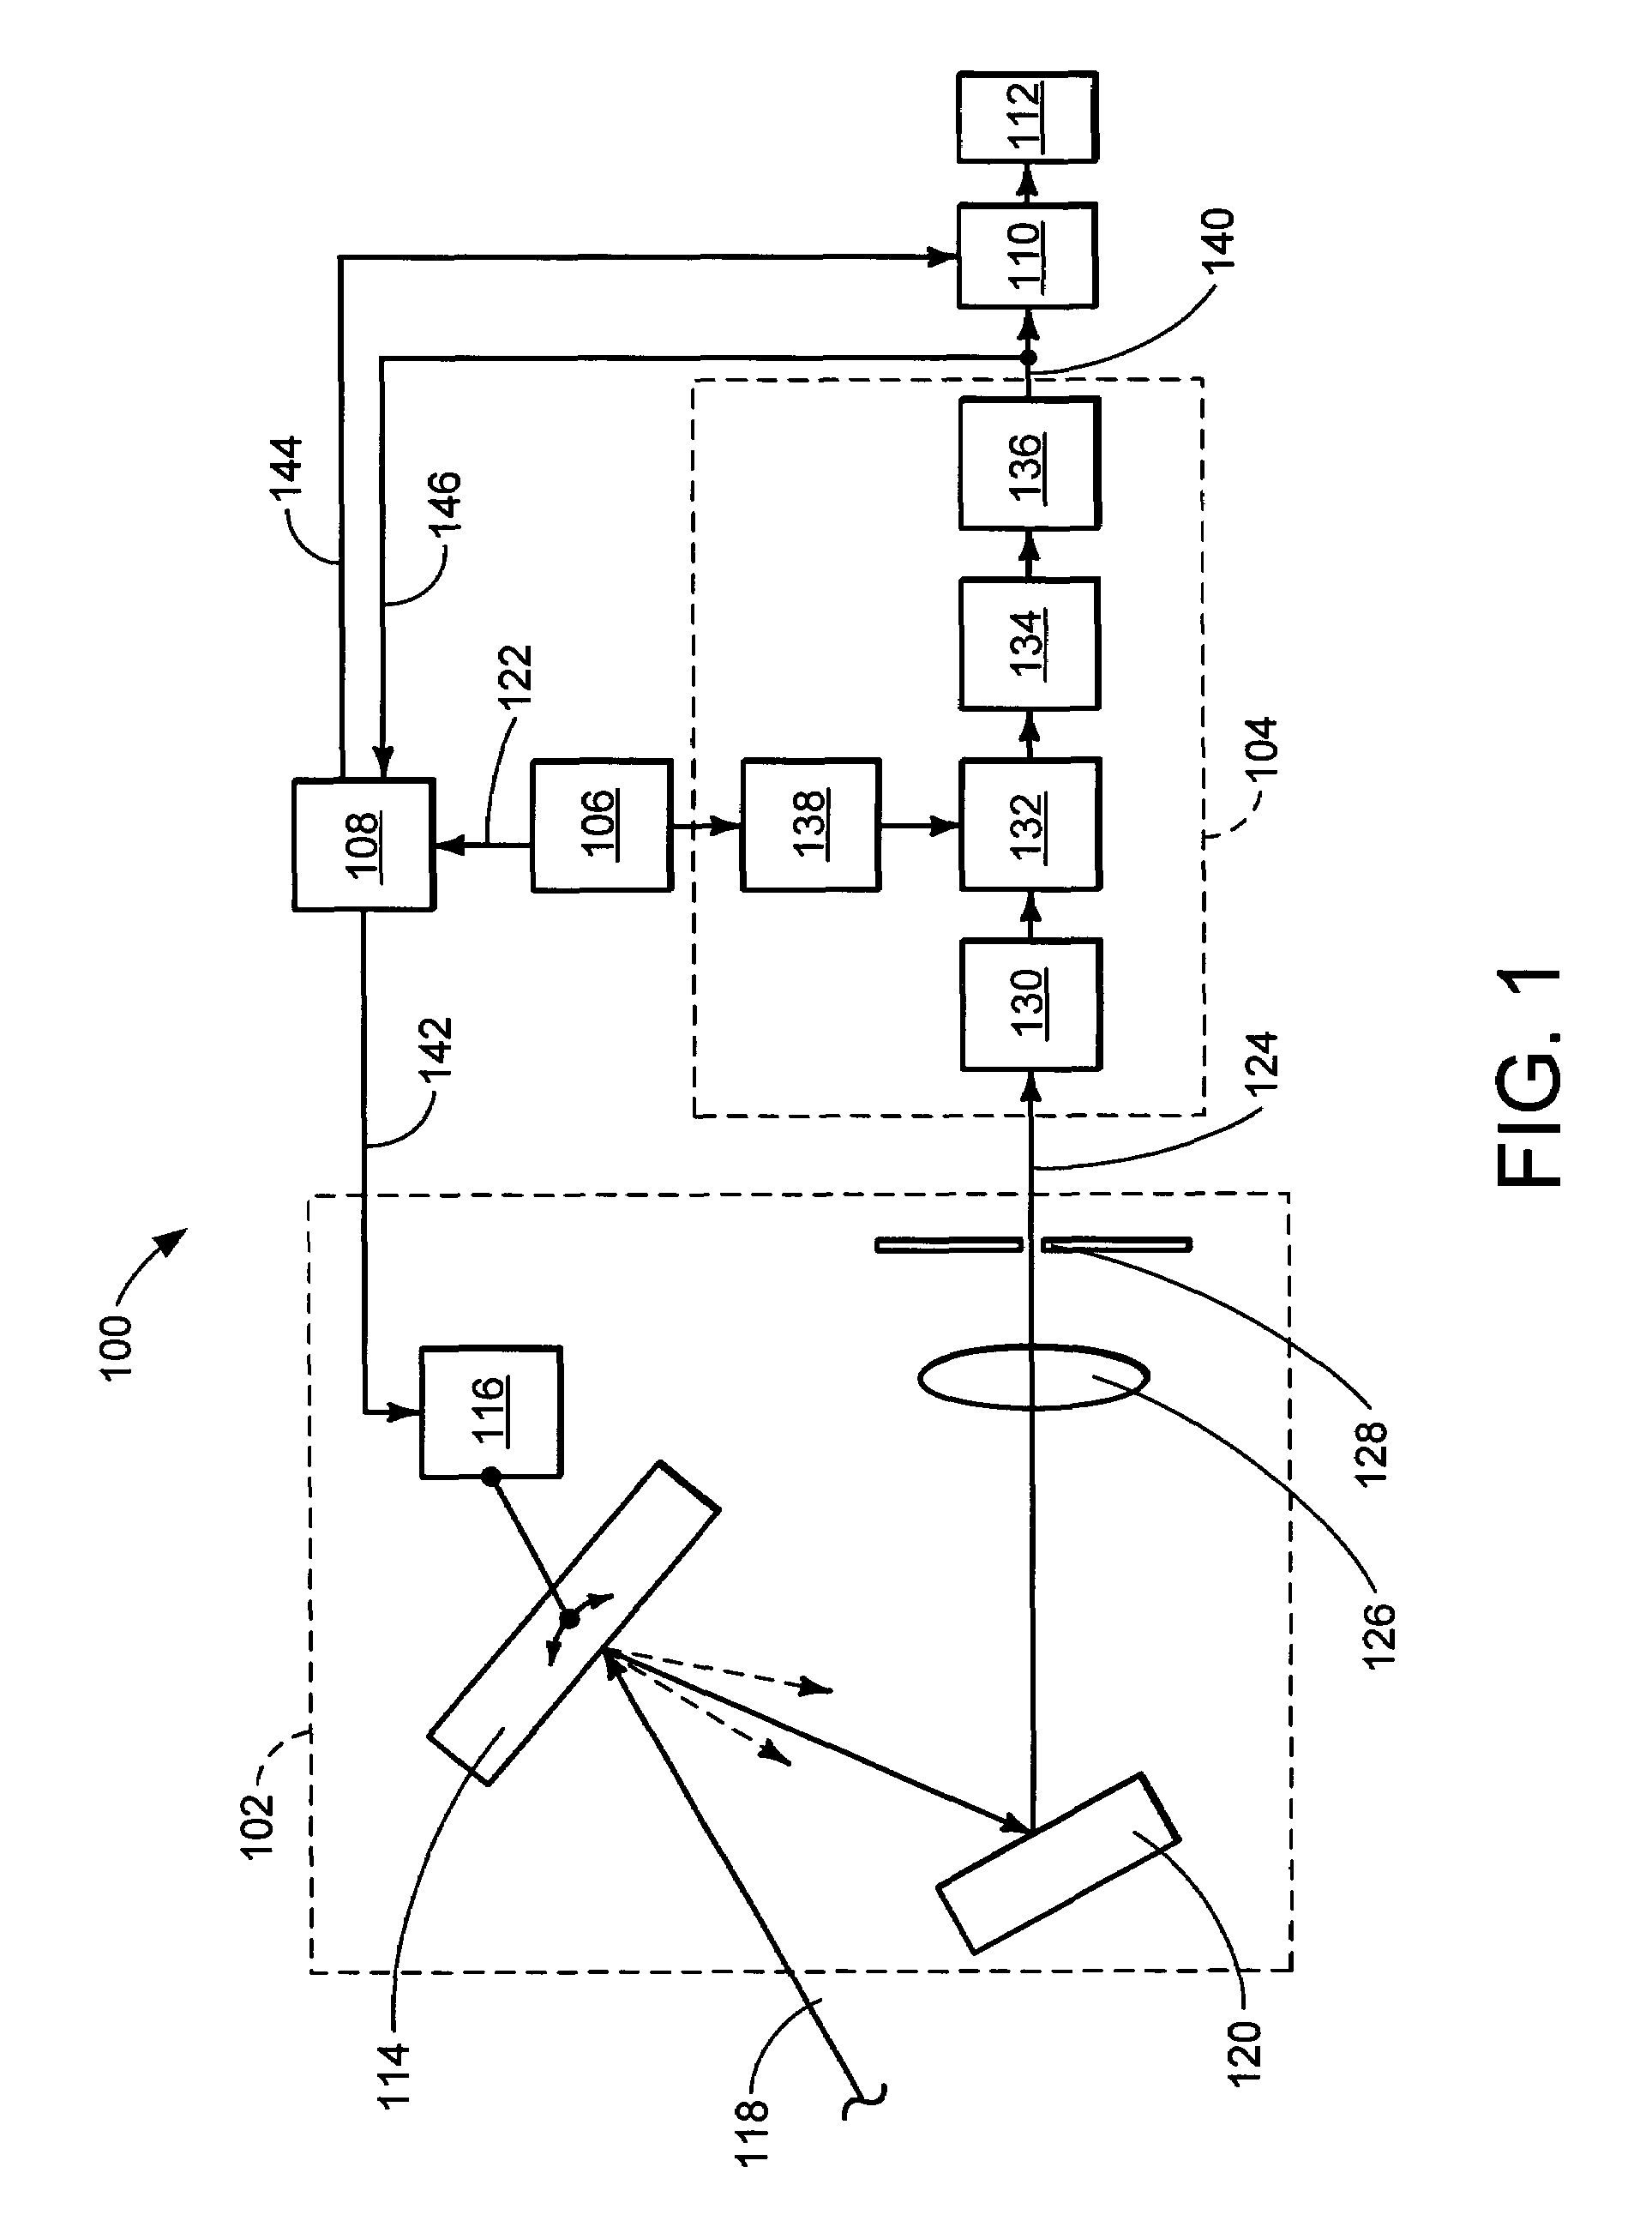 Method and apparatus for measuring waveforms and wavelengths of optical signals